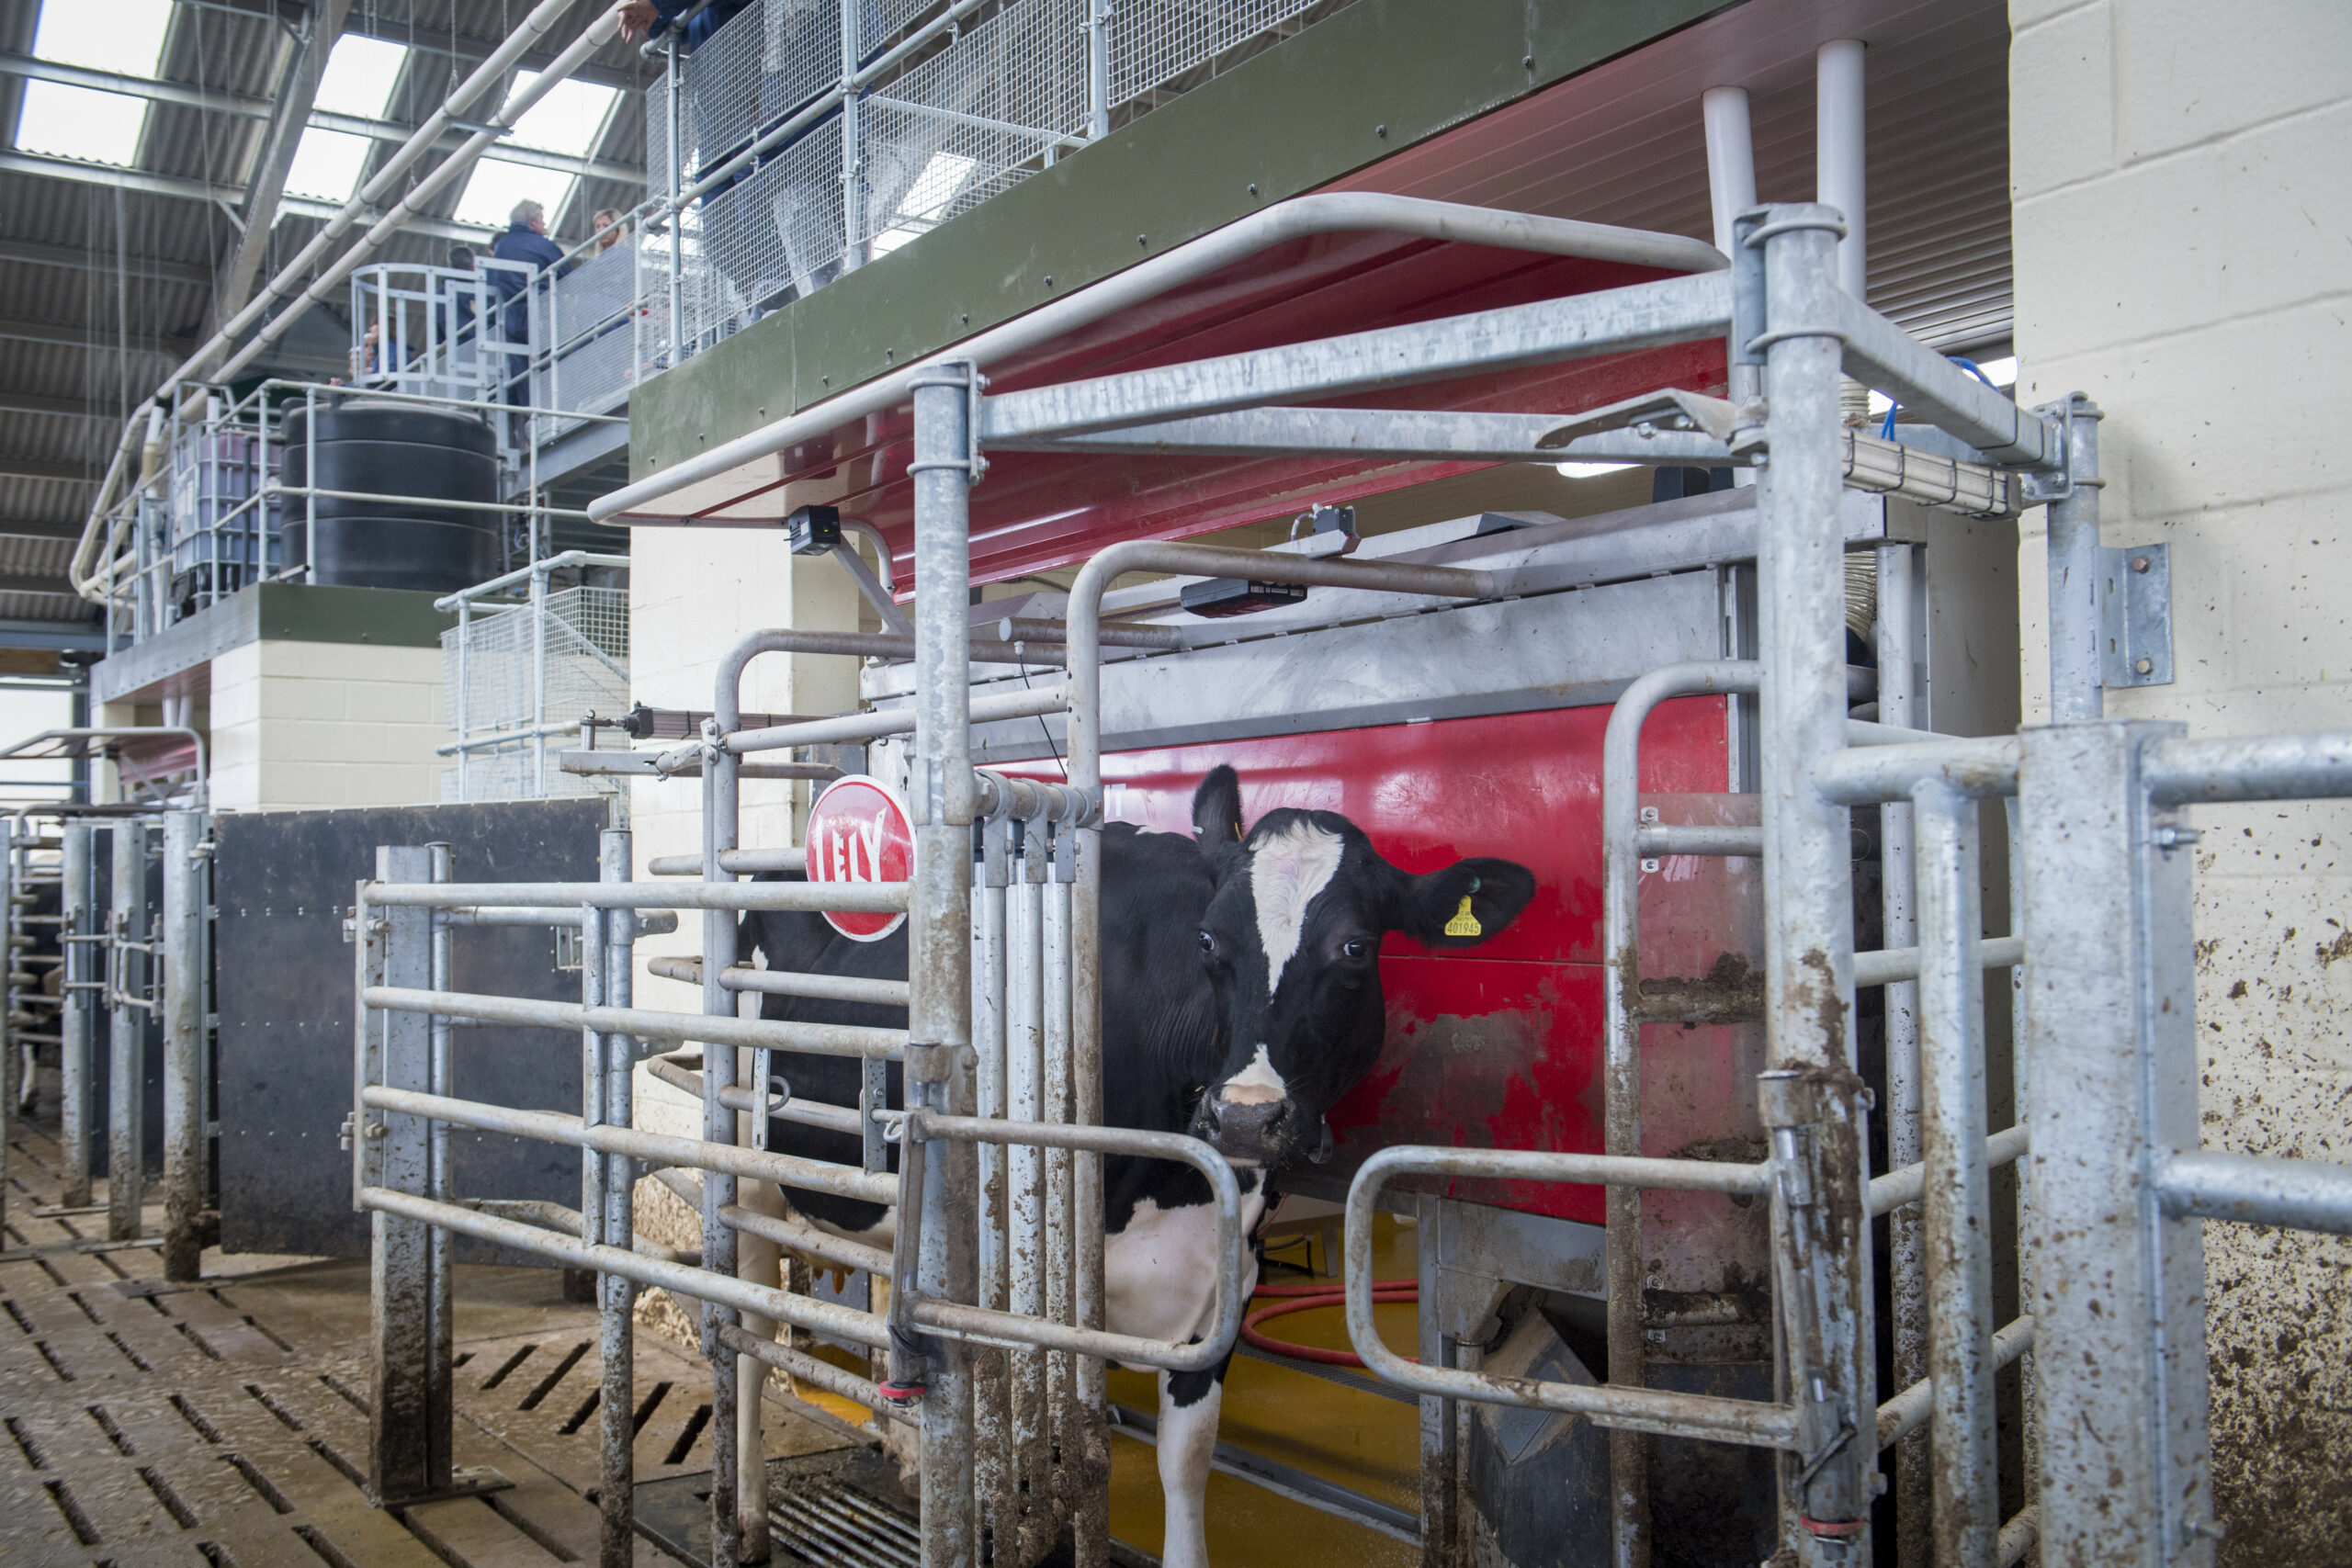 New Uk Dairy Centre Robotic Milking At The Forefront Dairy Global